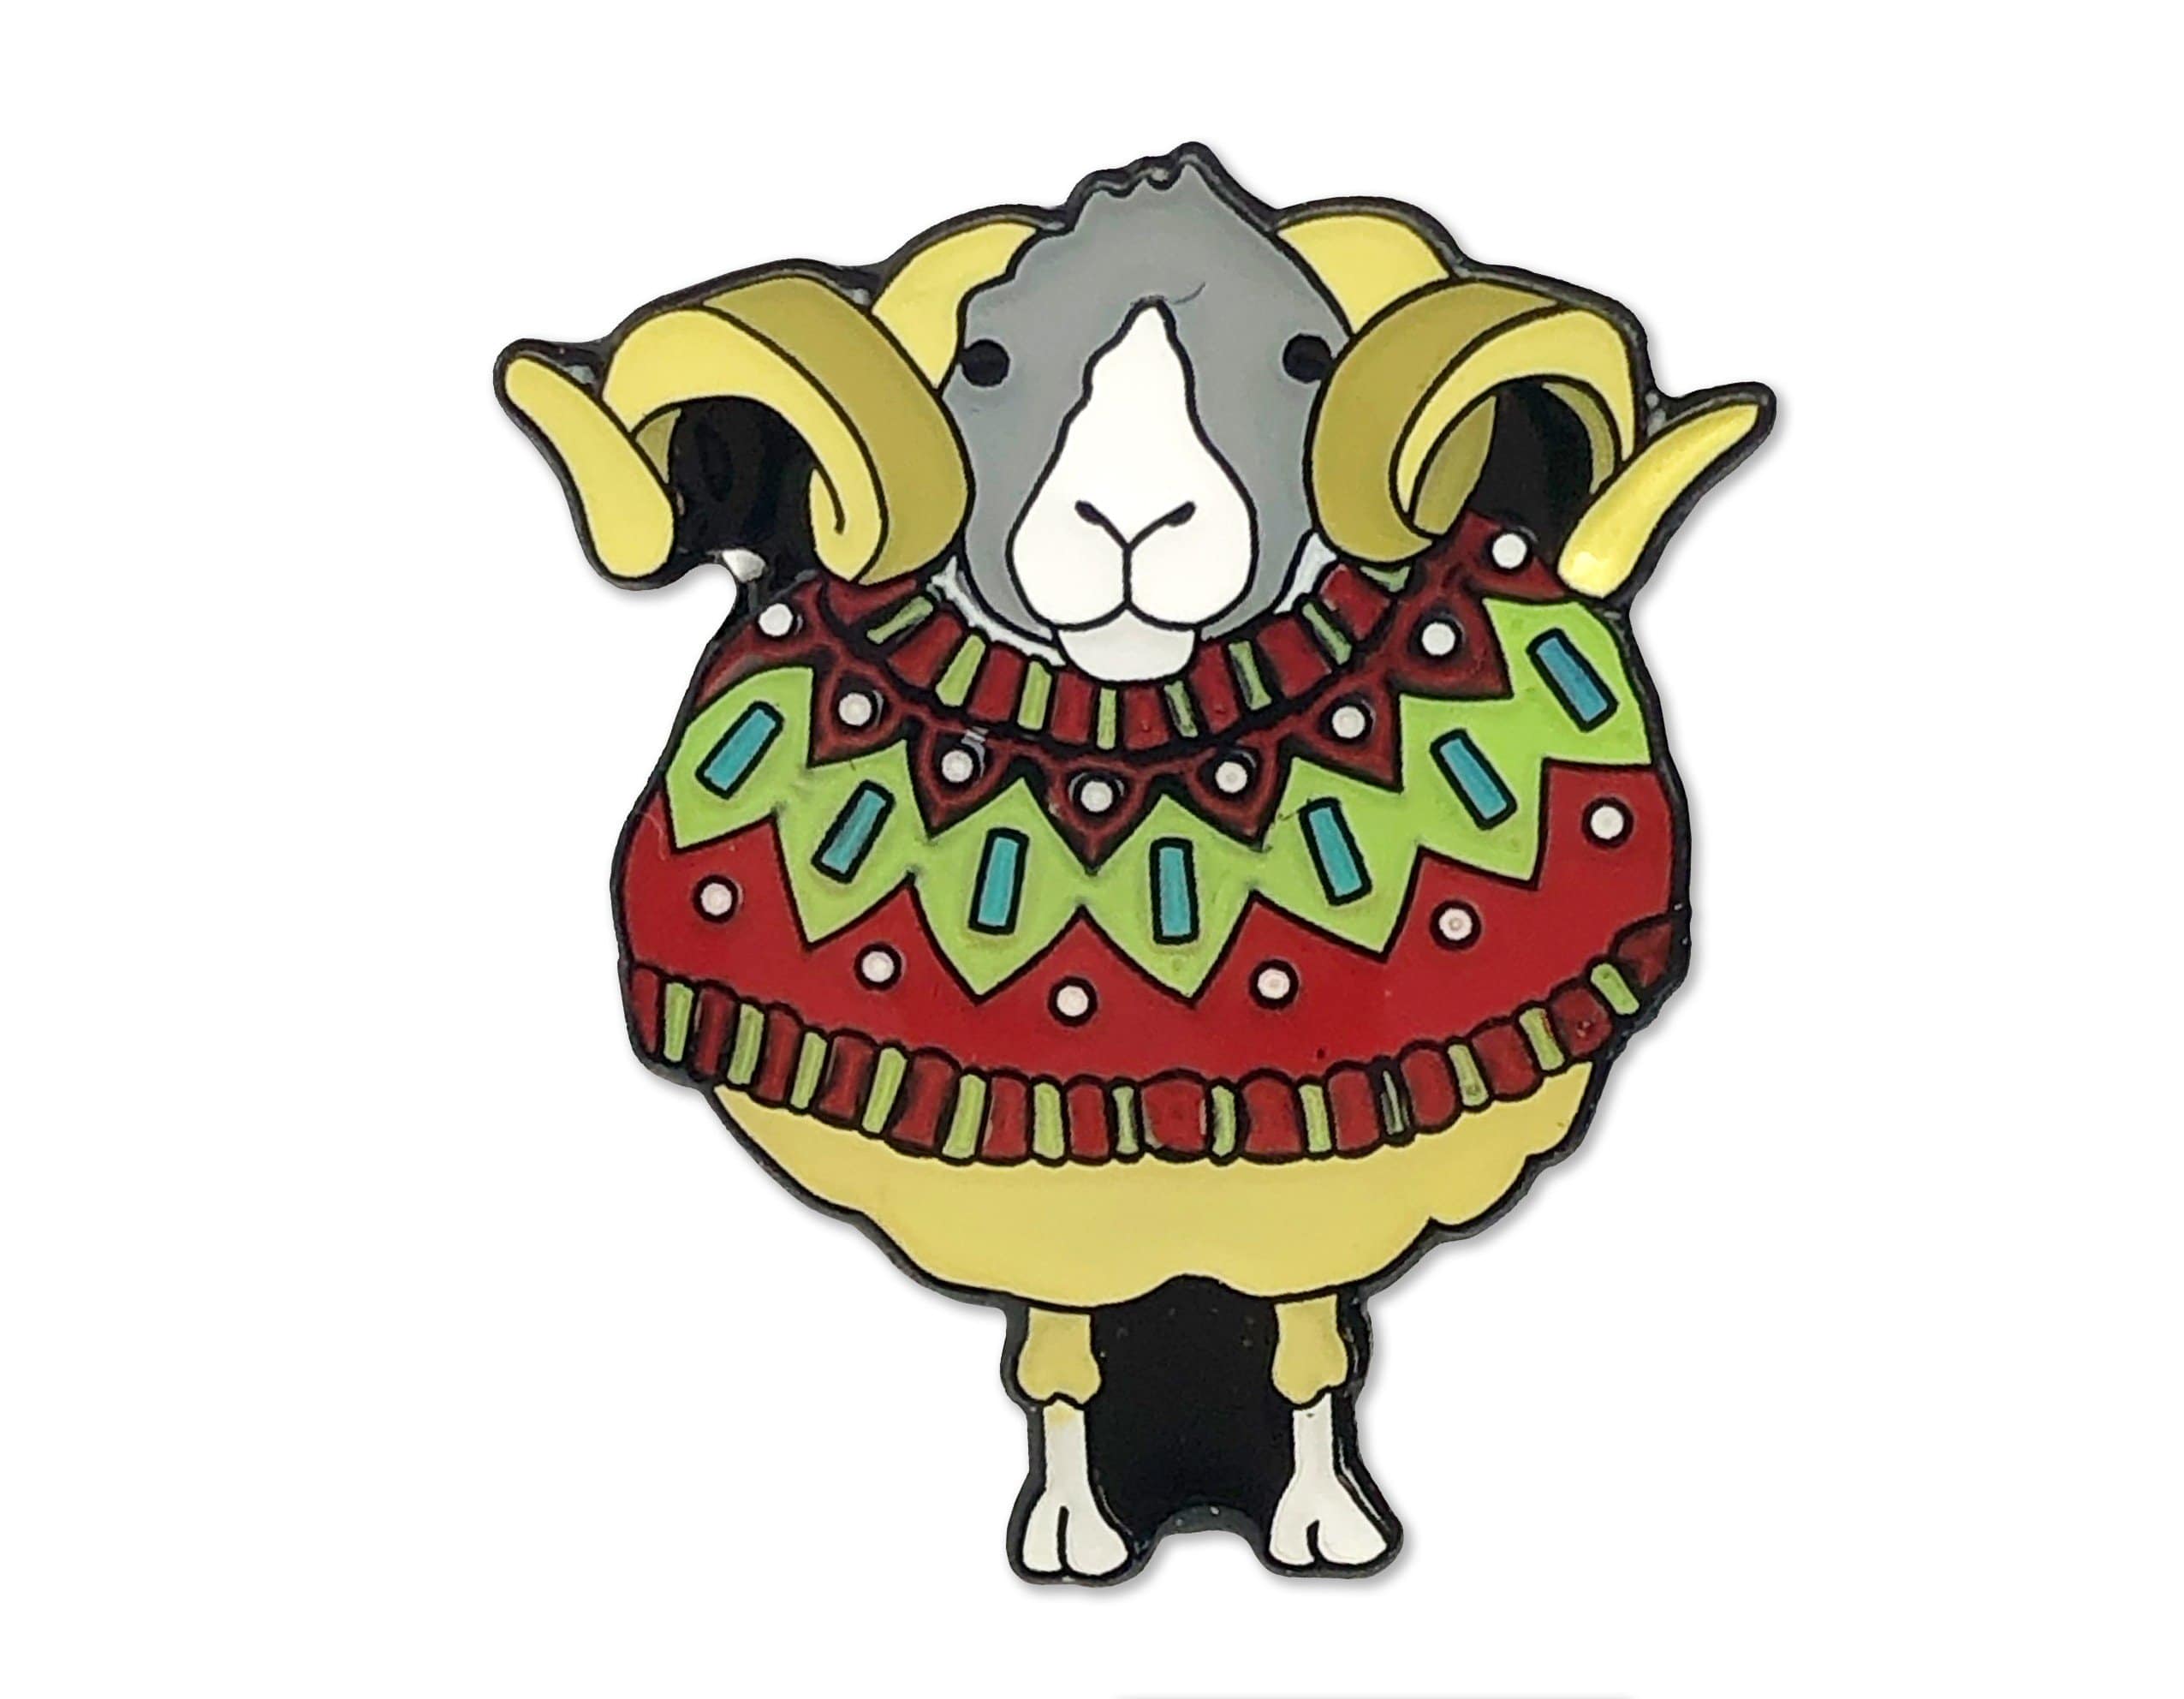 Emma Ball Accessories Emma Ball - Enamel Pin - Woolly Sheep in Red Sweater 5060703321975